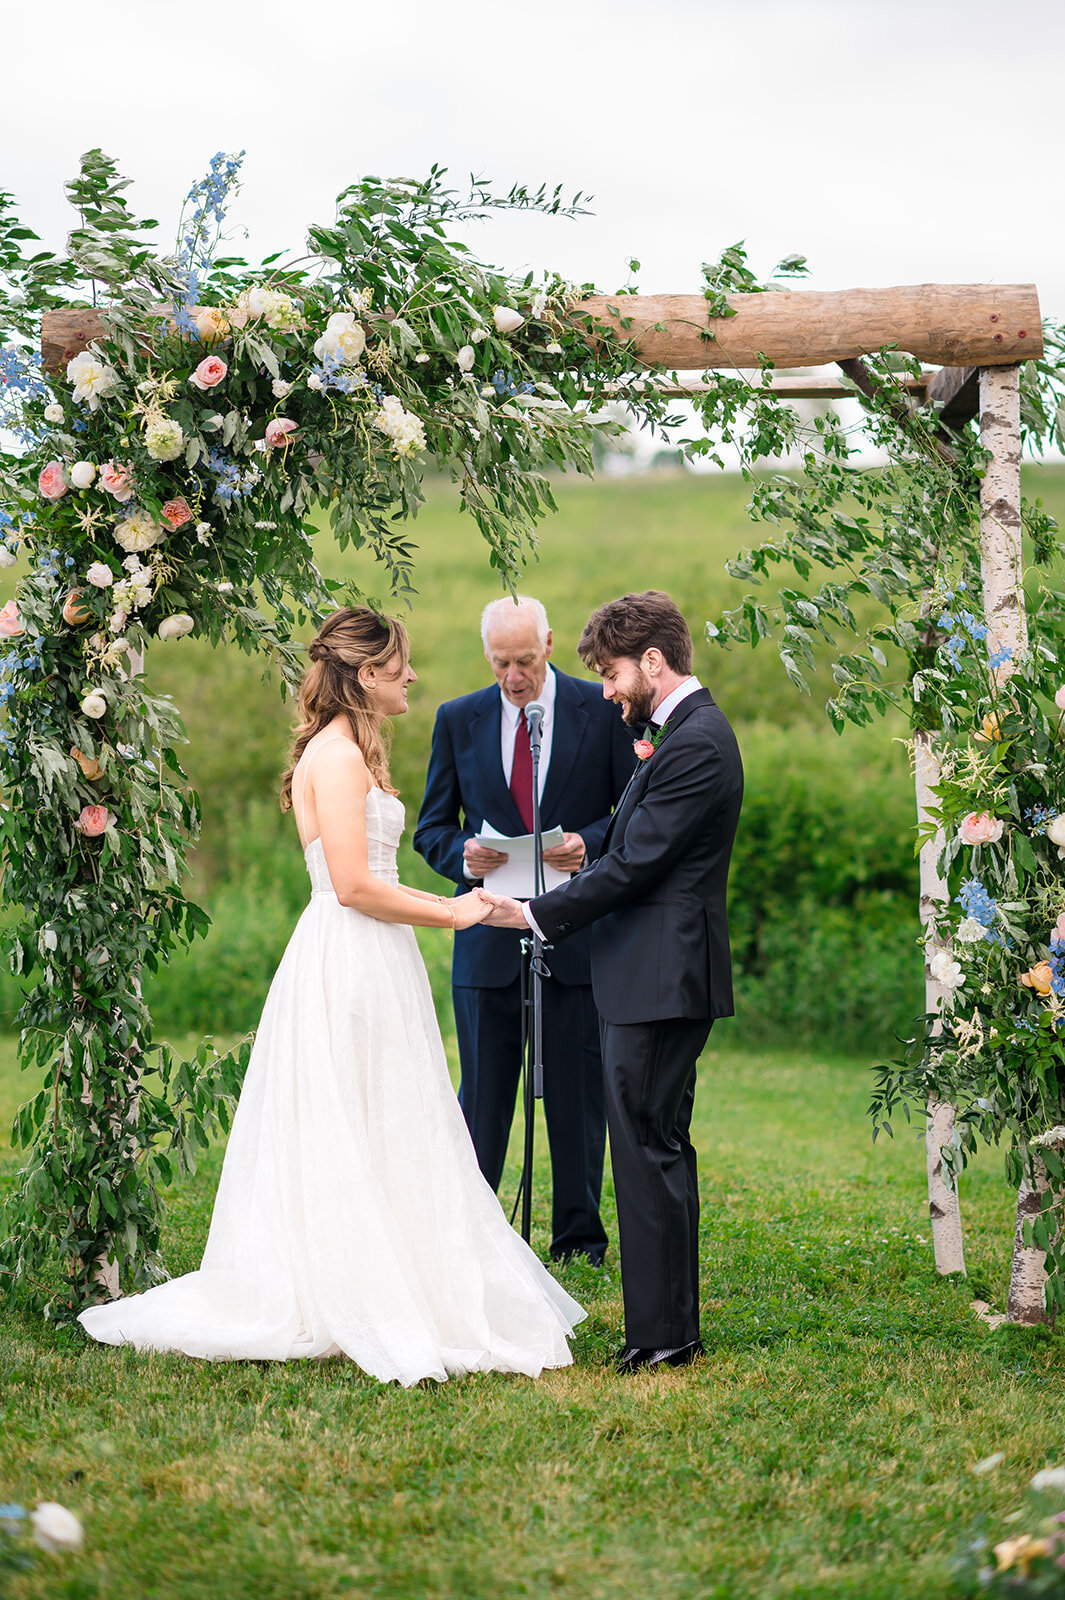 A bride and groom exchanging vows under a rustic wooden arch decorated with flowers.